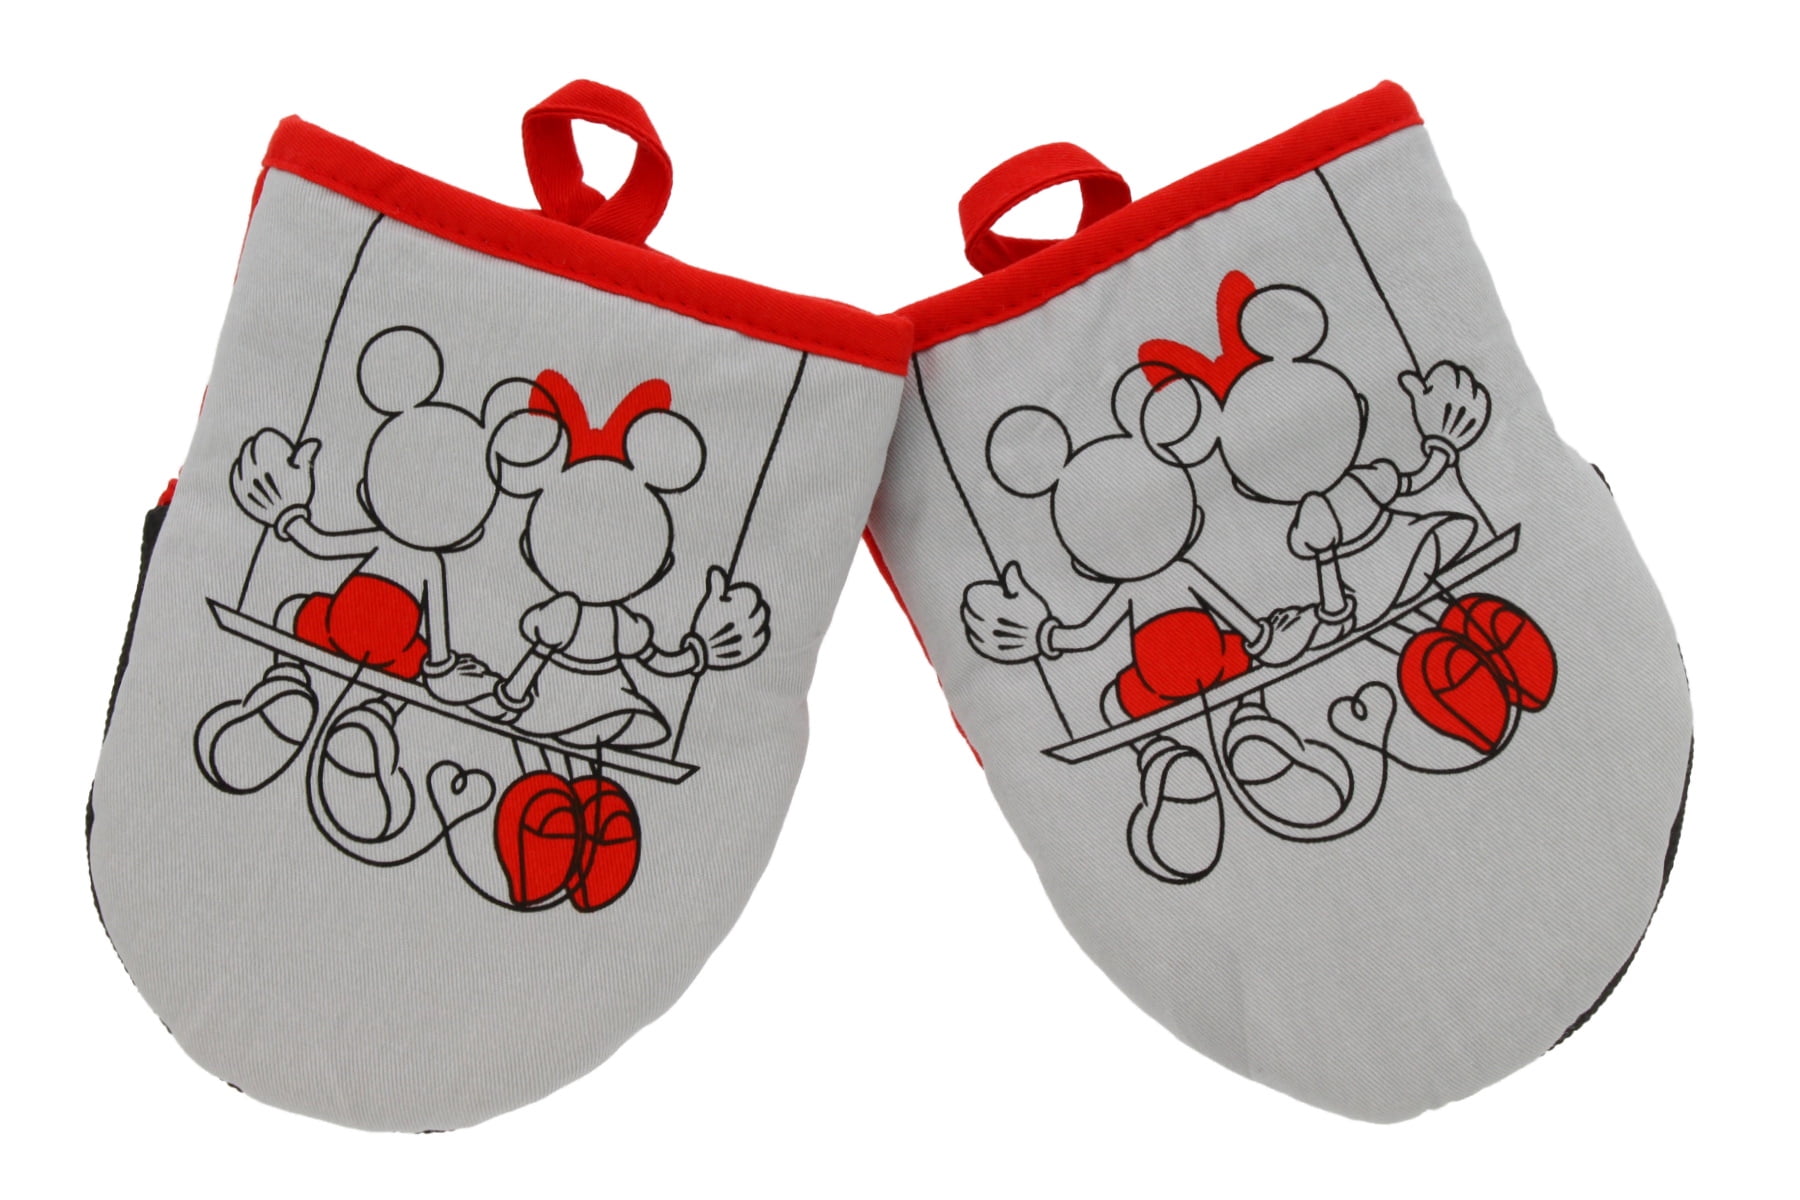 Disney Kitchen Neoprene Mini Oven Mitts, 2pk-Heat Resistant Oven Gloves  with Insulation Ideal for Handling Hot Kitchenware-Non-Slip Grip, Hanging